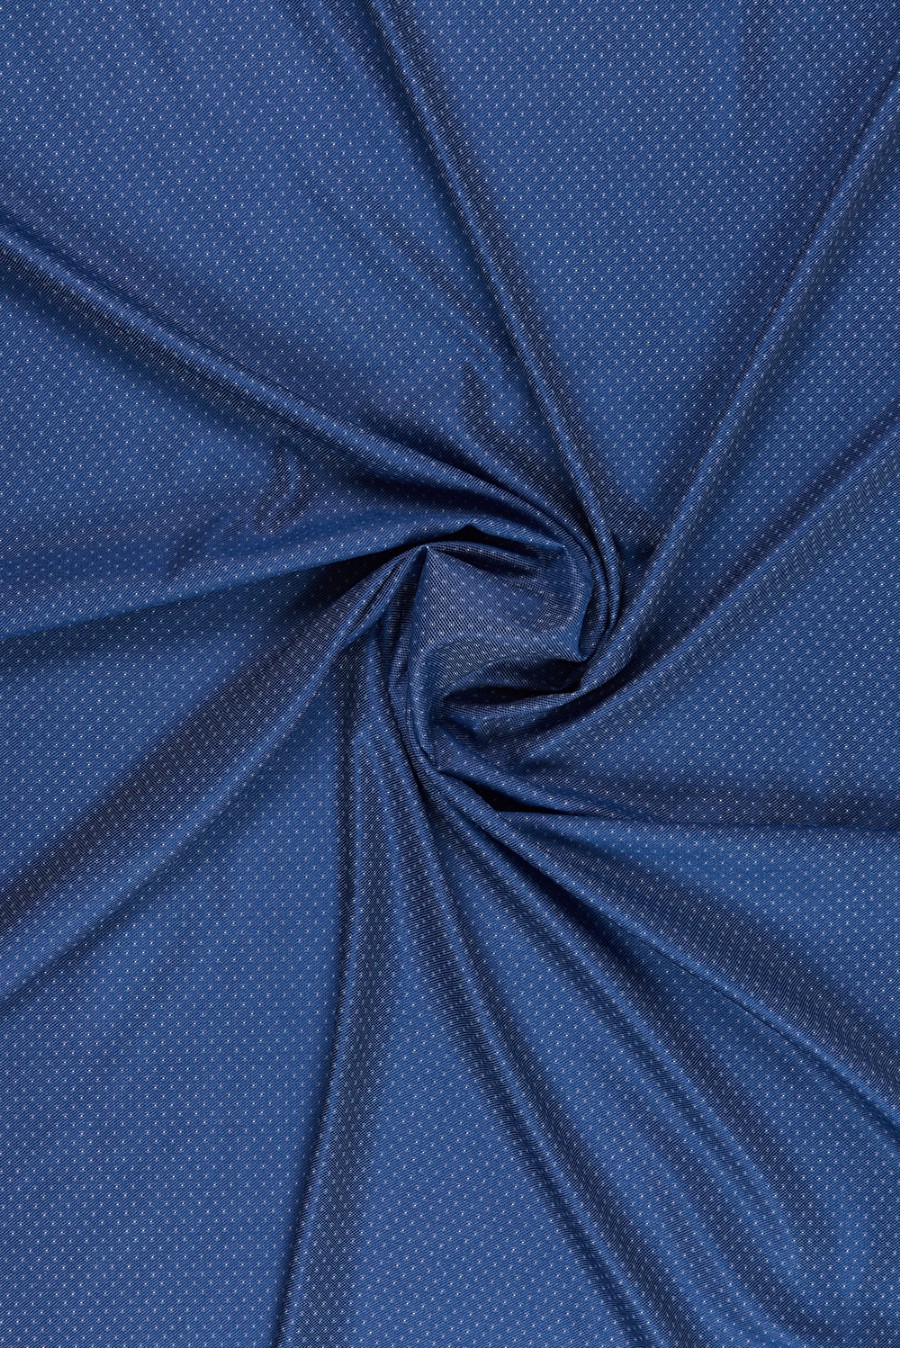 POLYESTER - COTTON - 5